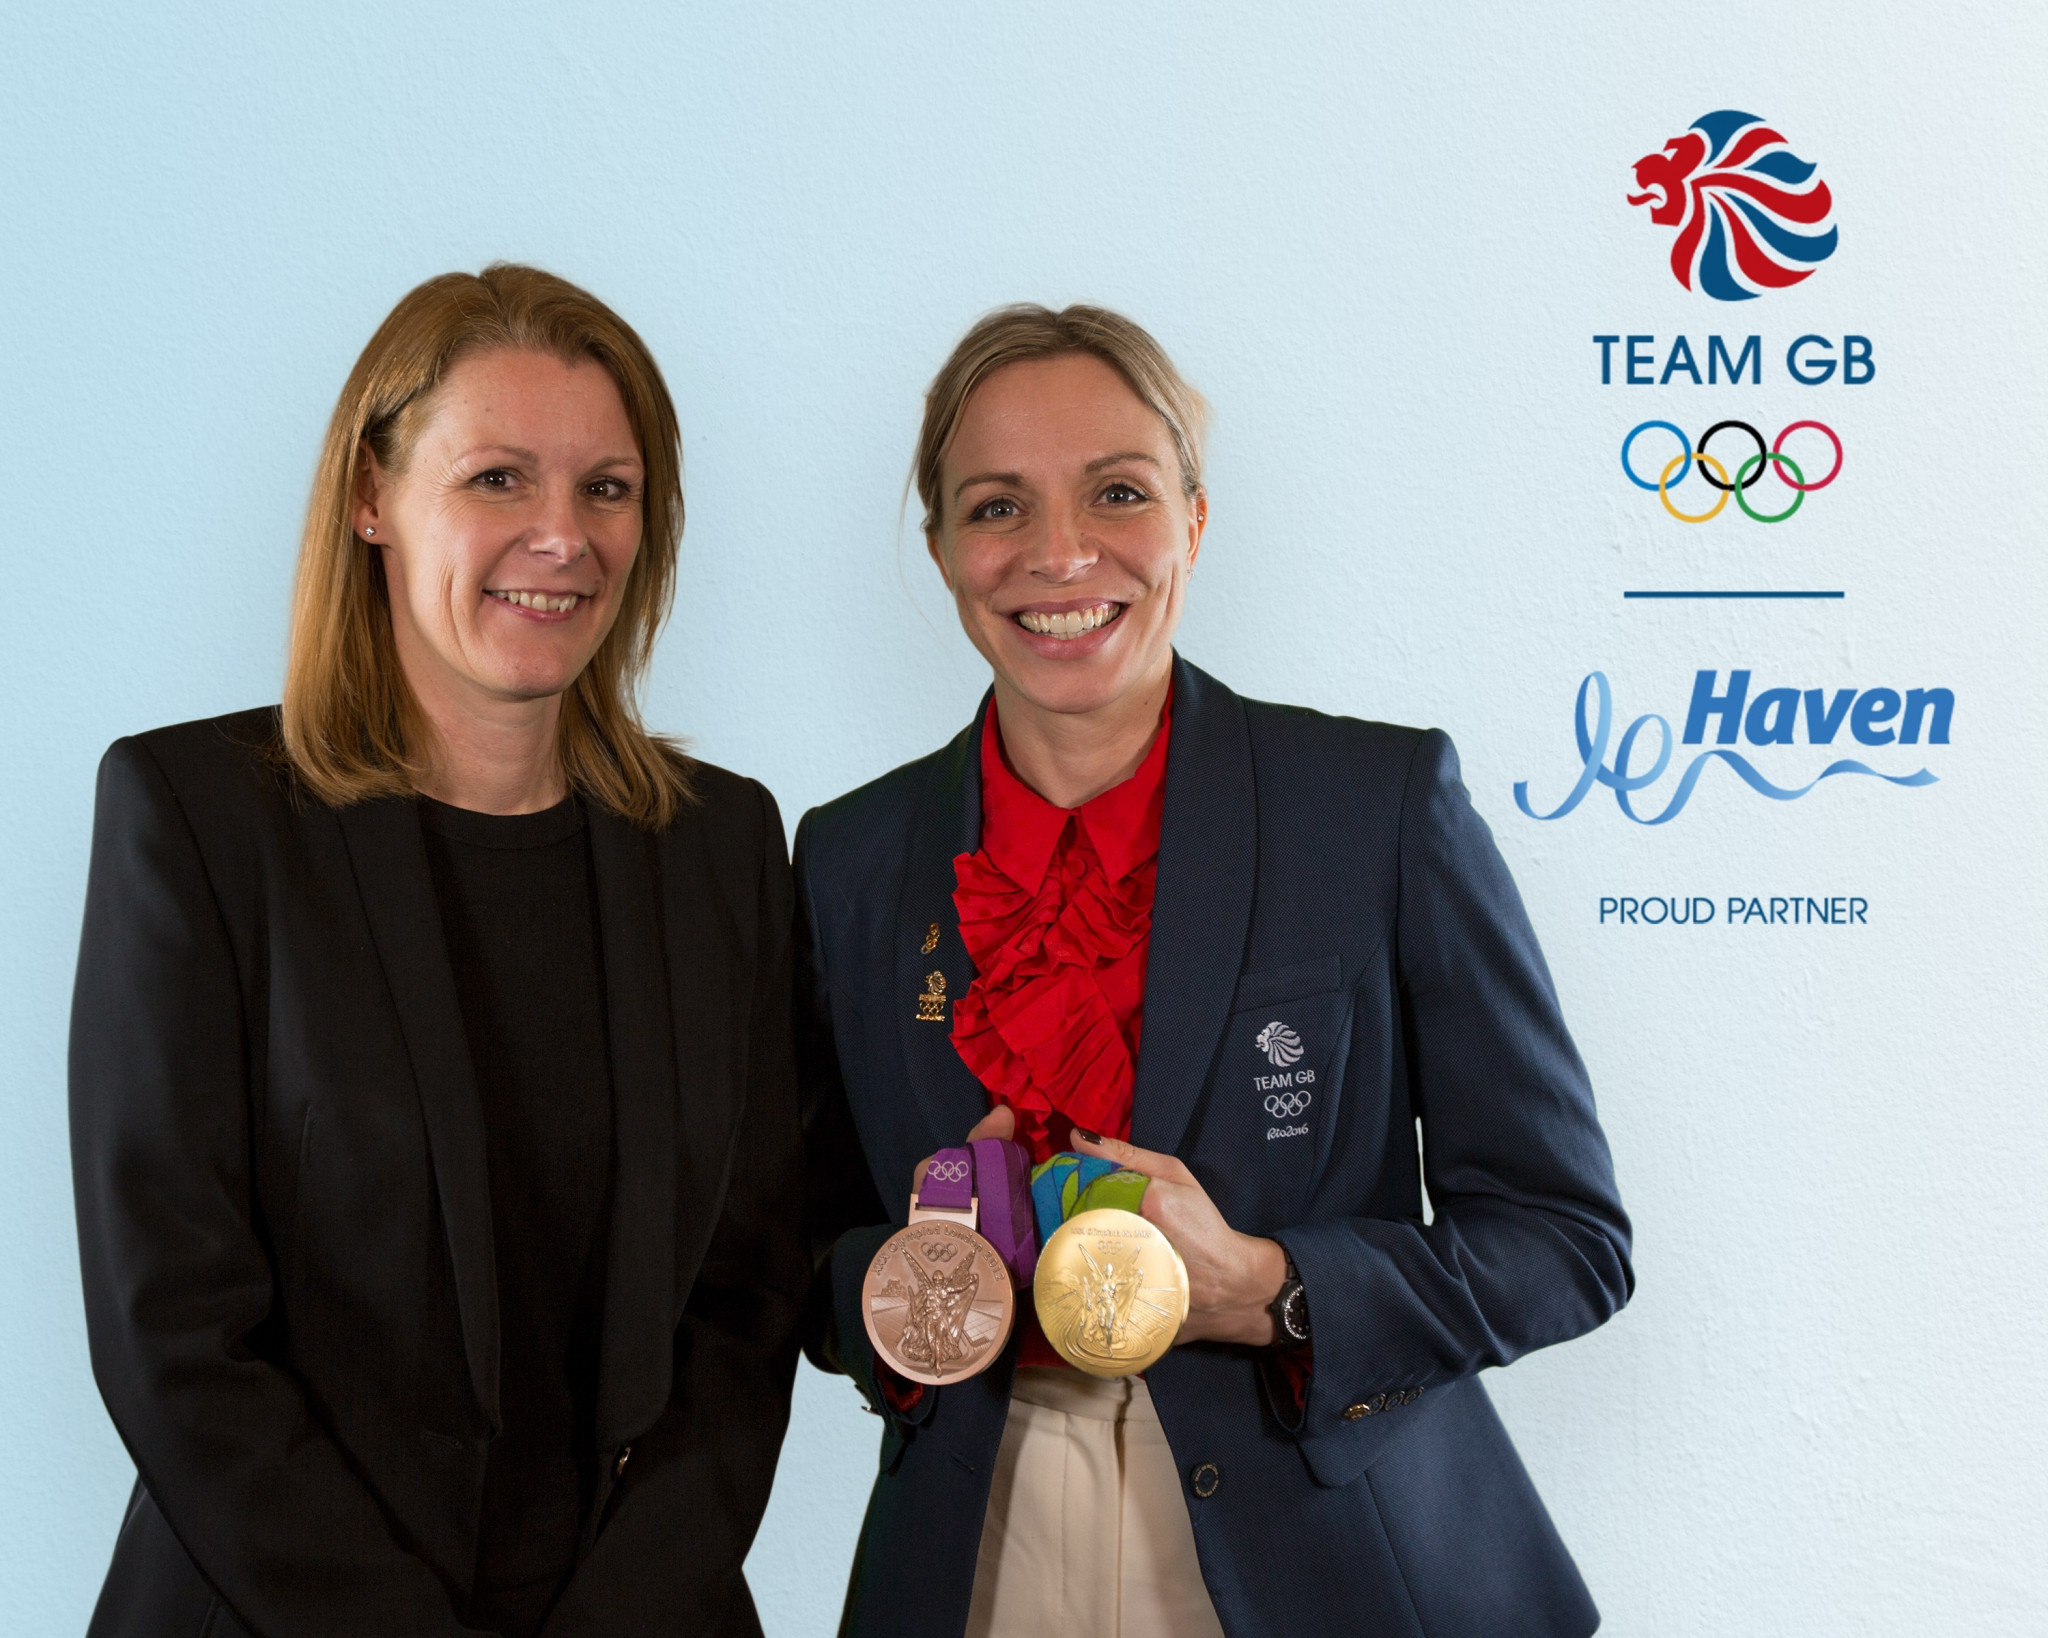 Haven become Team GB's official partner ahead of Tokyo 2020 as Persimmon deal funds grassroots